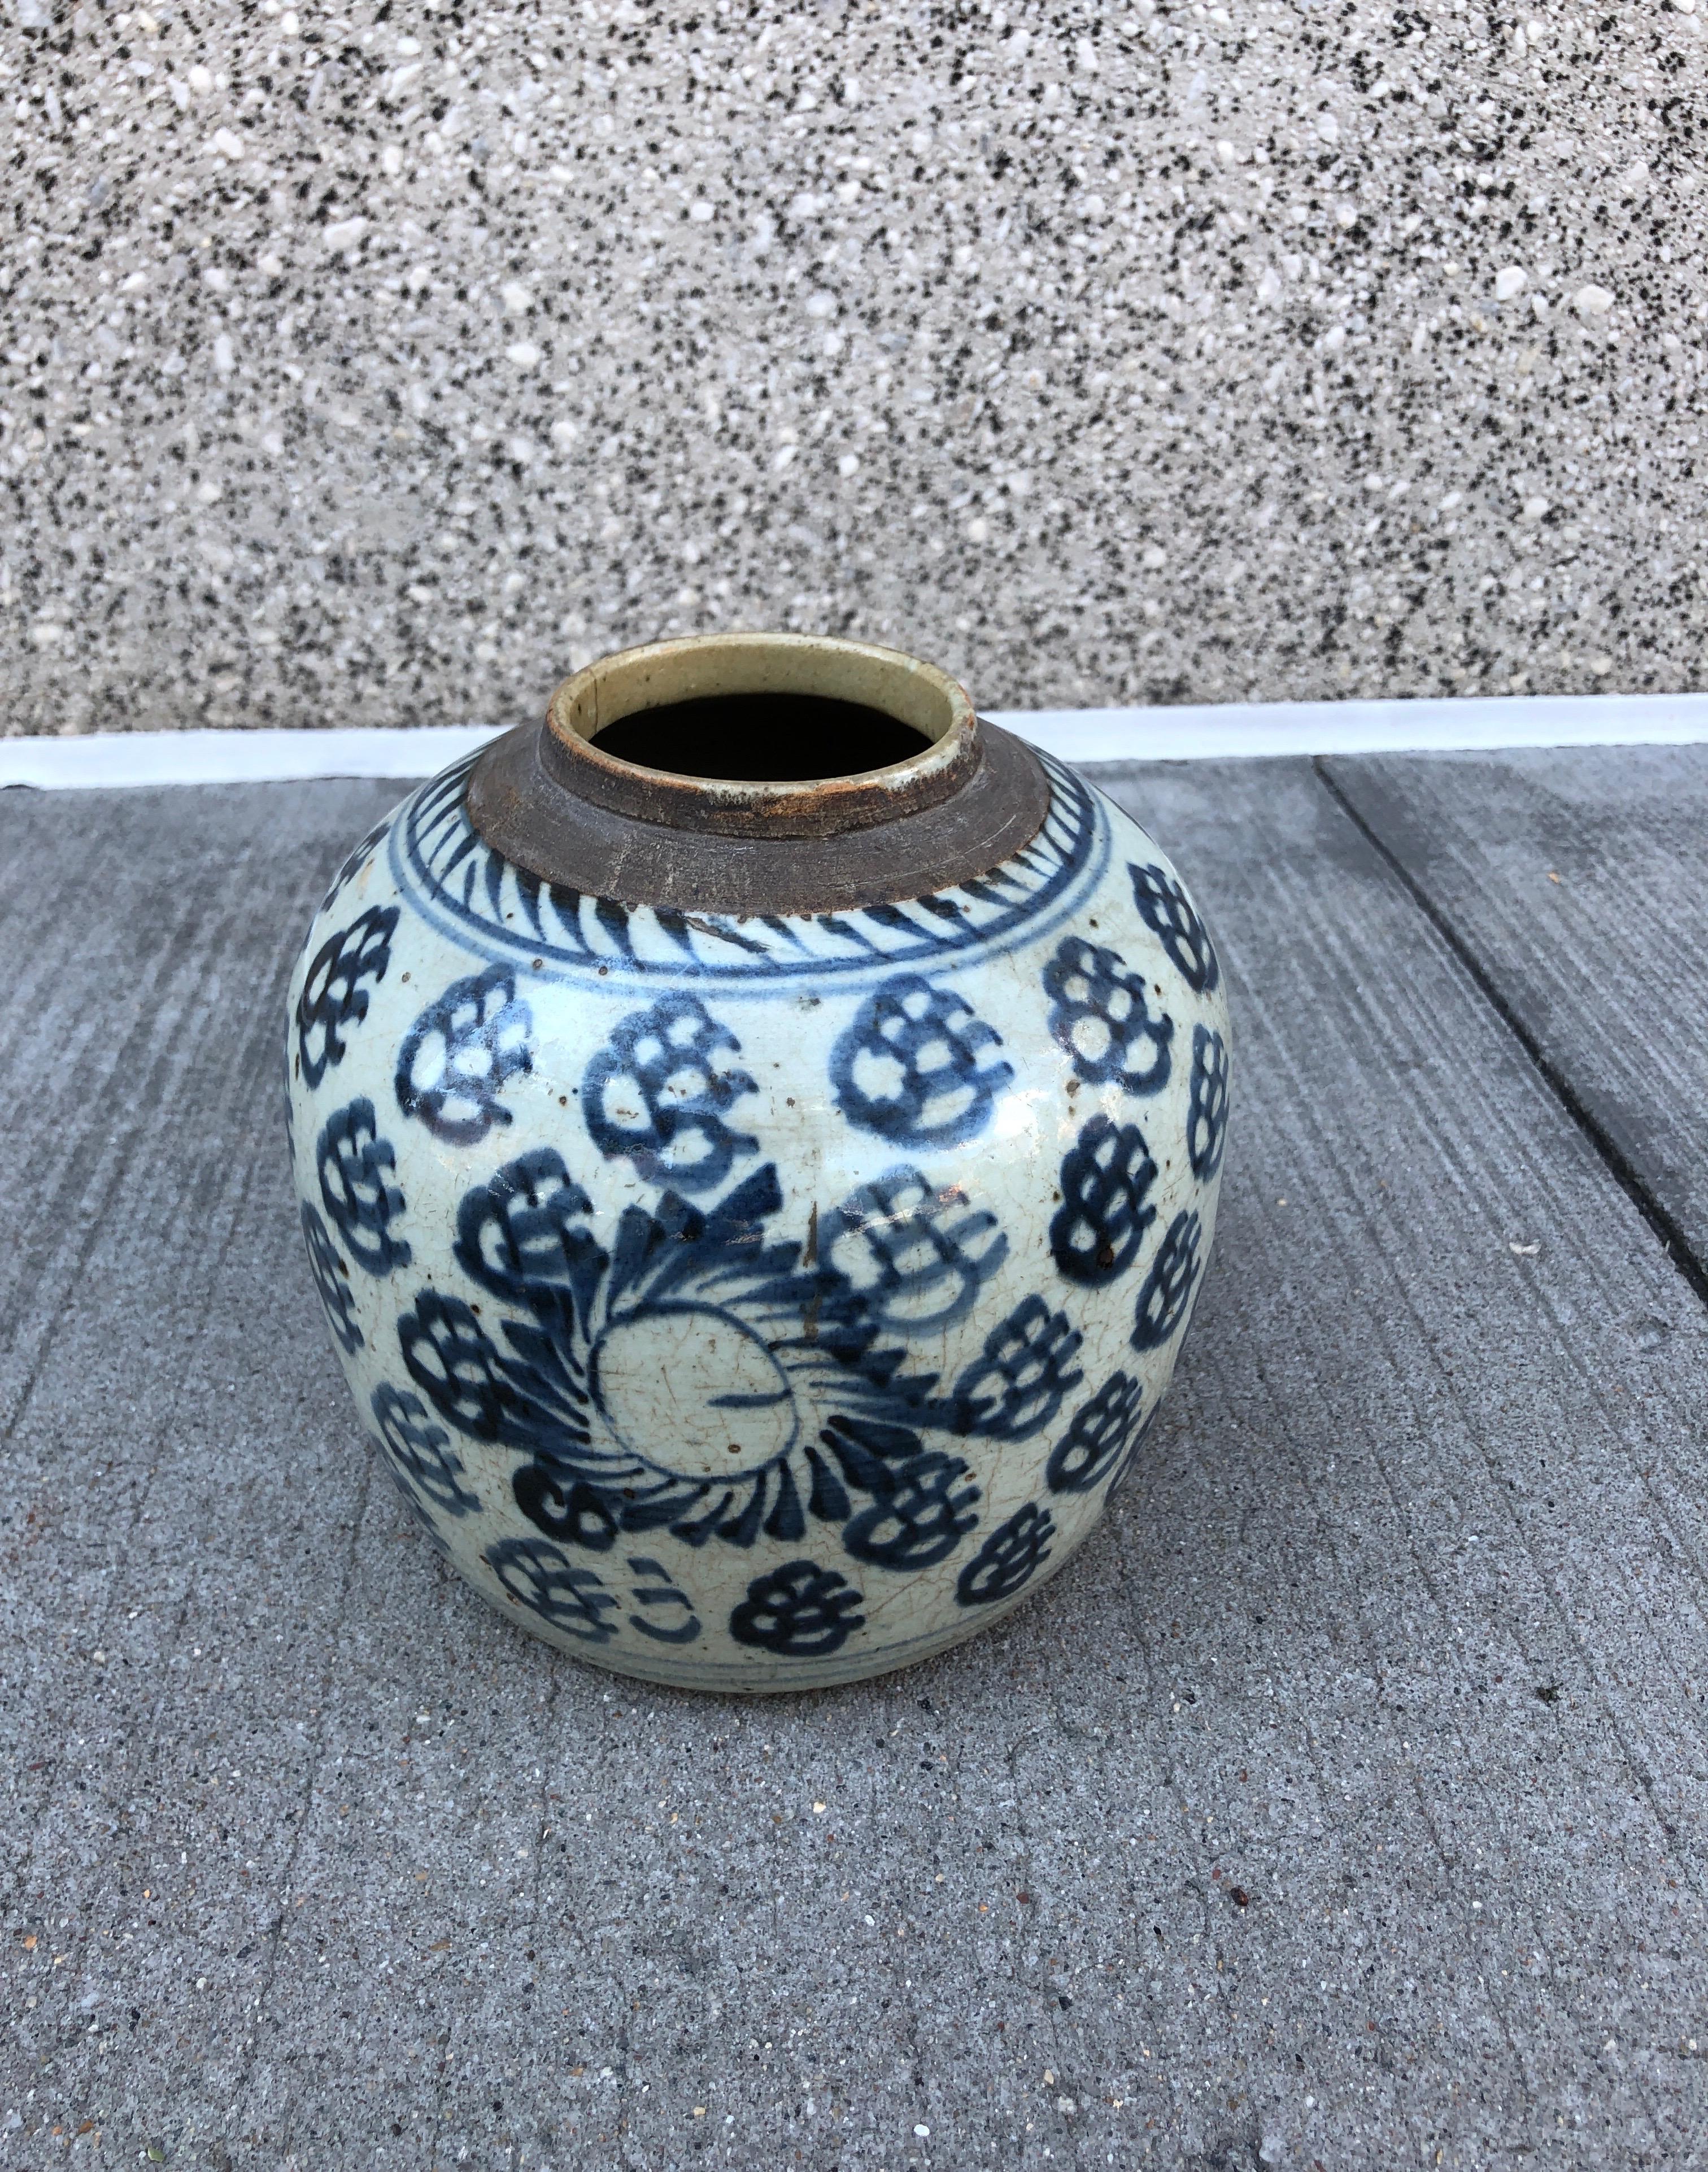 poterie chinoise ancienne